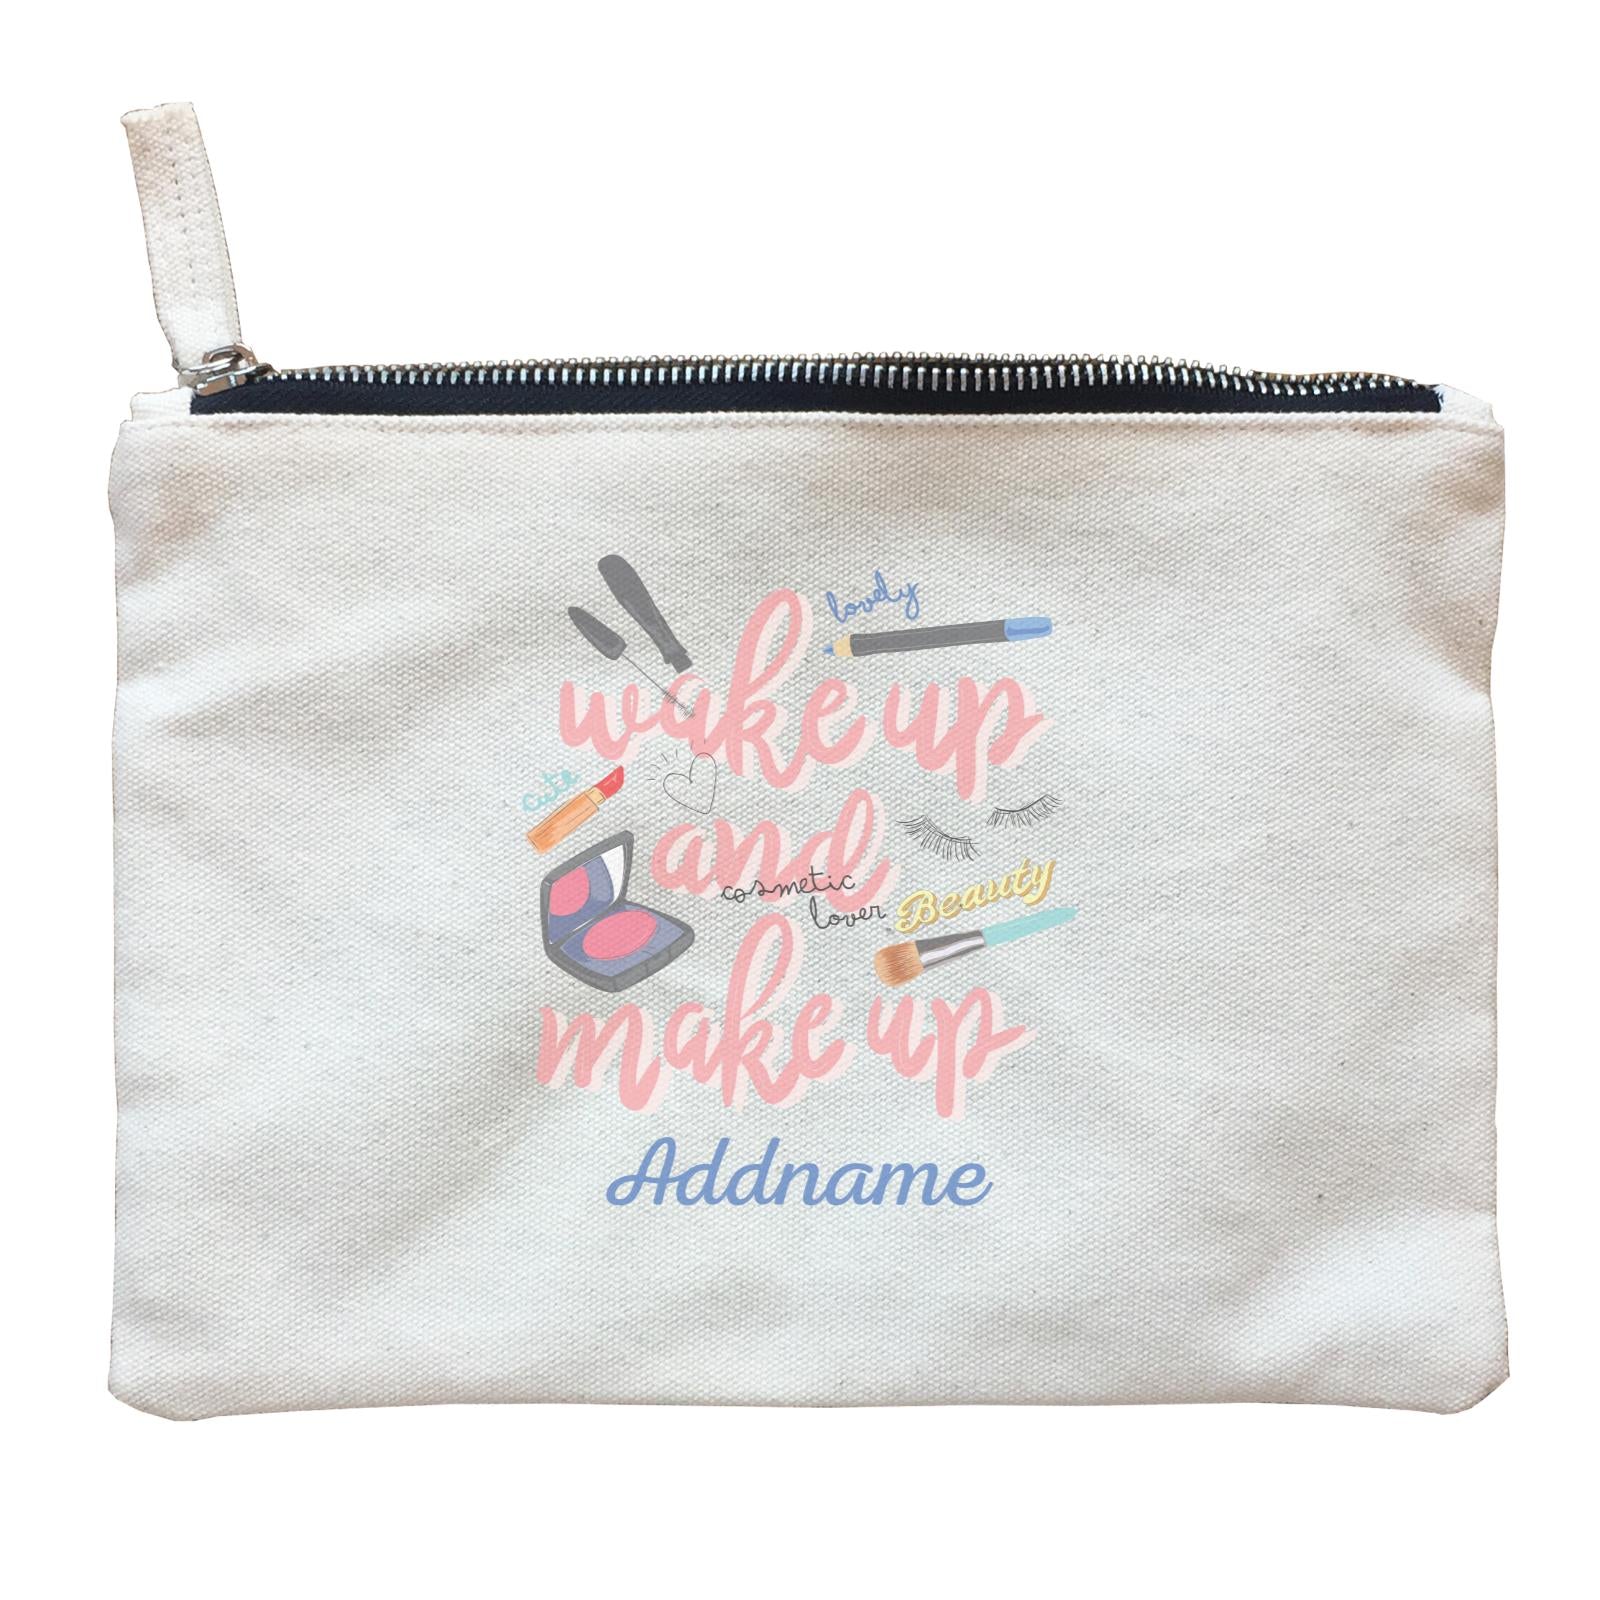 Make Up Quotes Make Up And Make Up Cosmetic Lover Beauty Addname Zipper Pouch